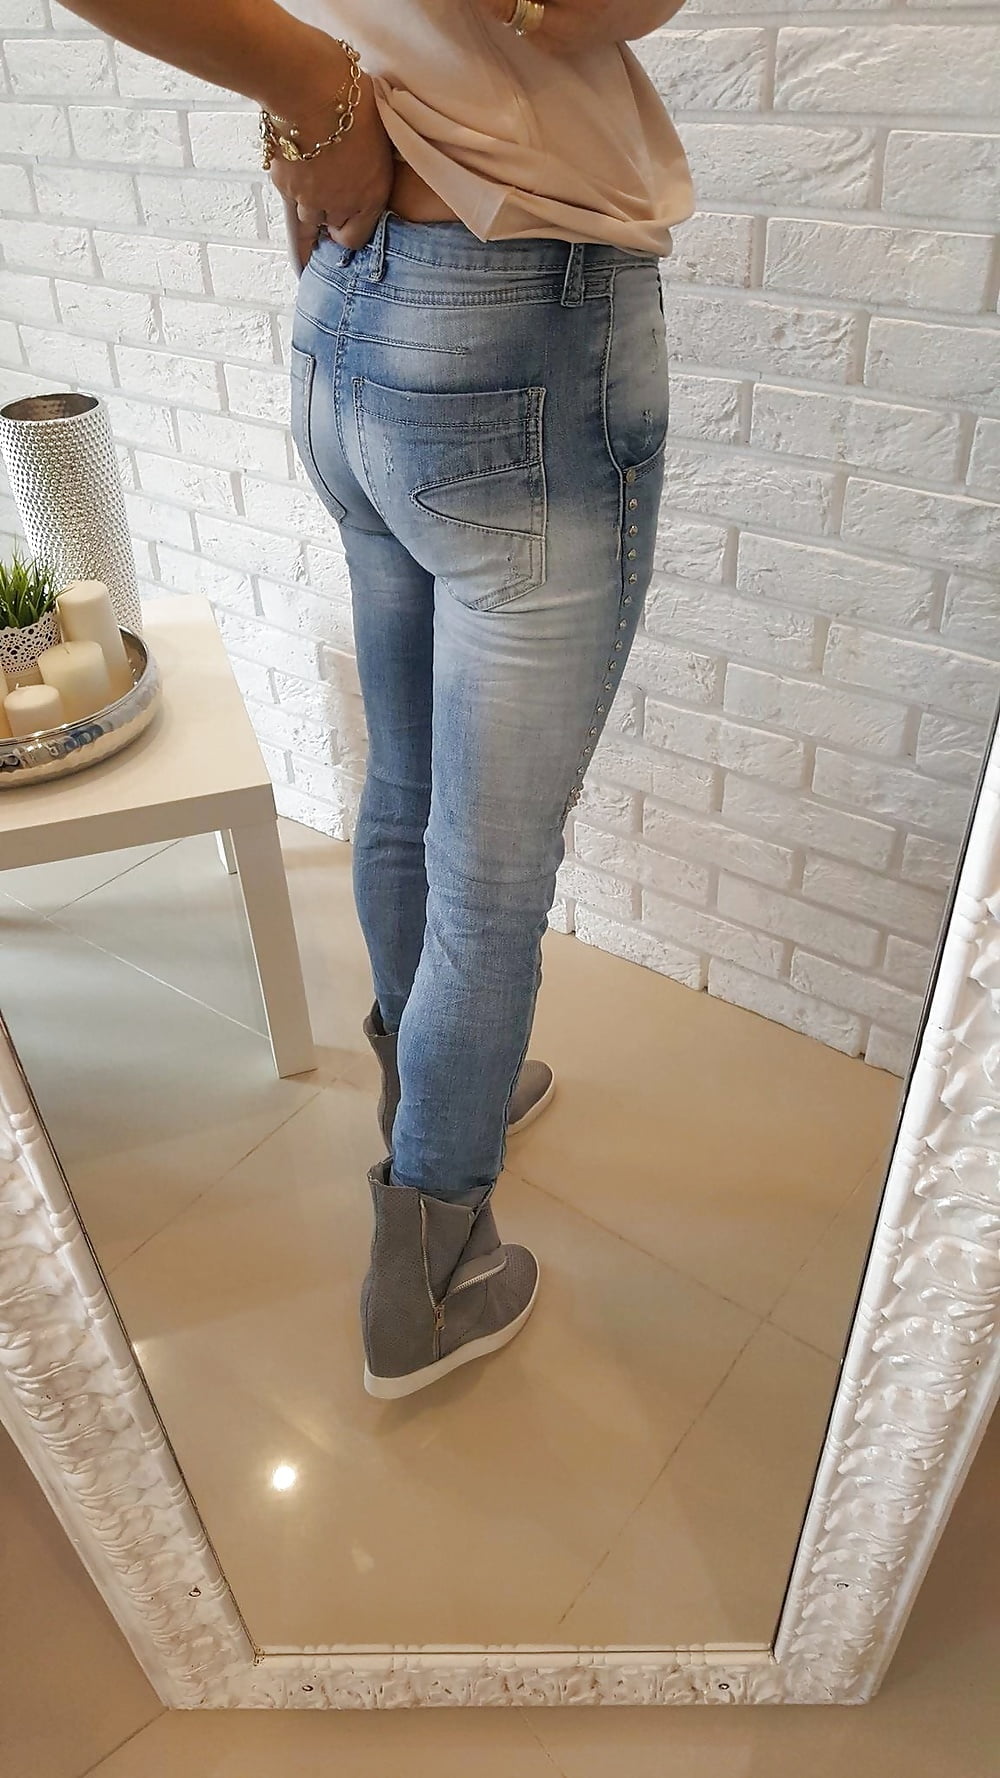 Compilation of my mom's ass in jeans  (12/13)